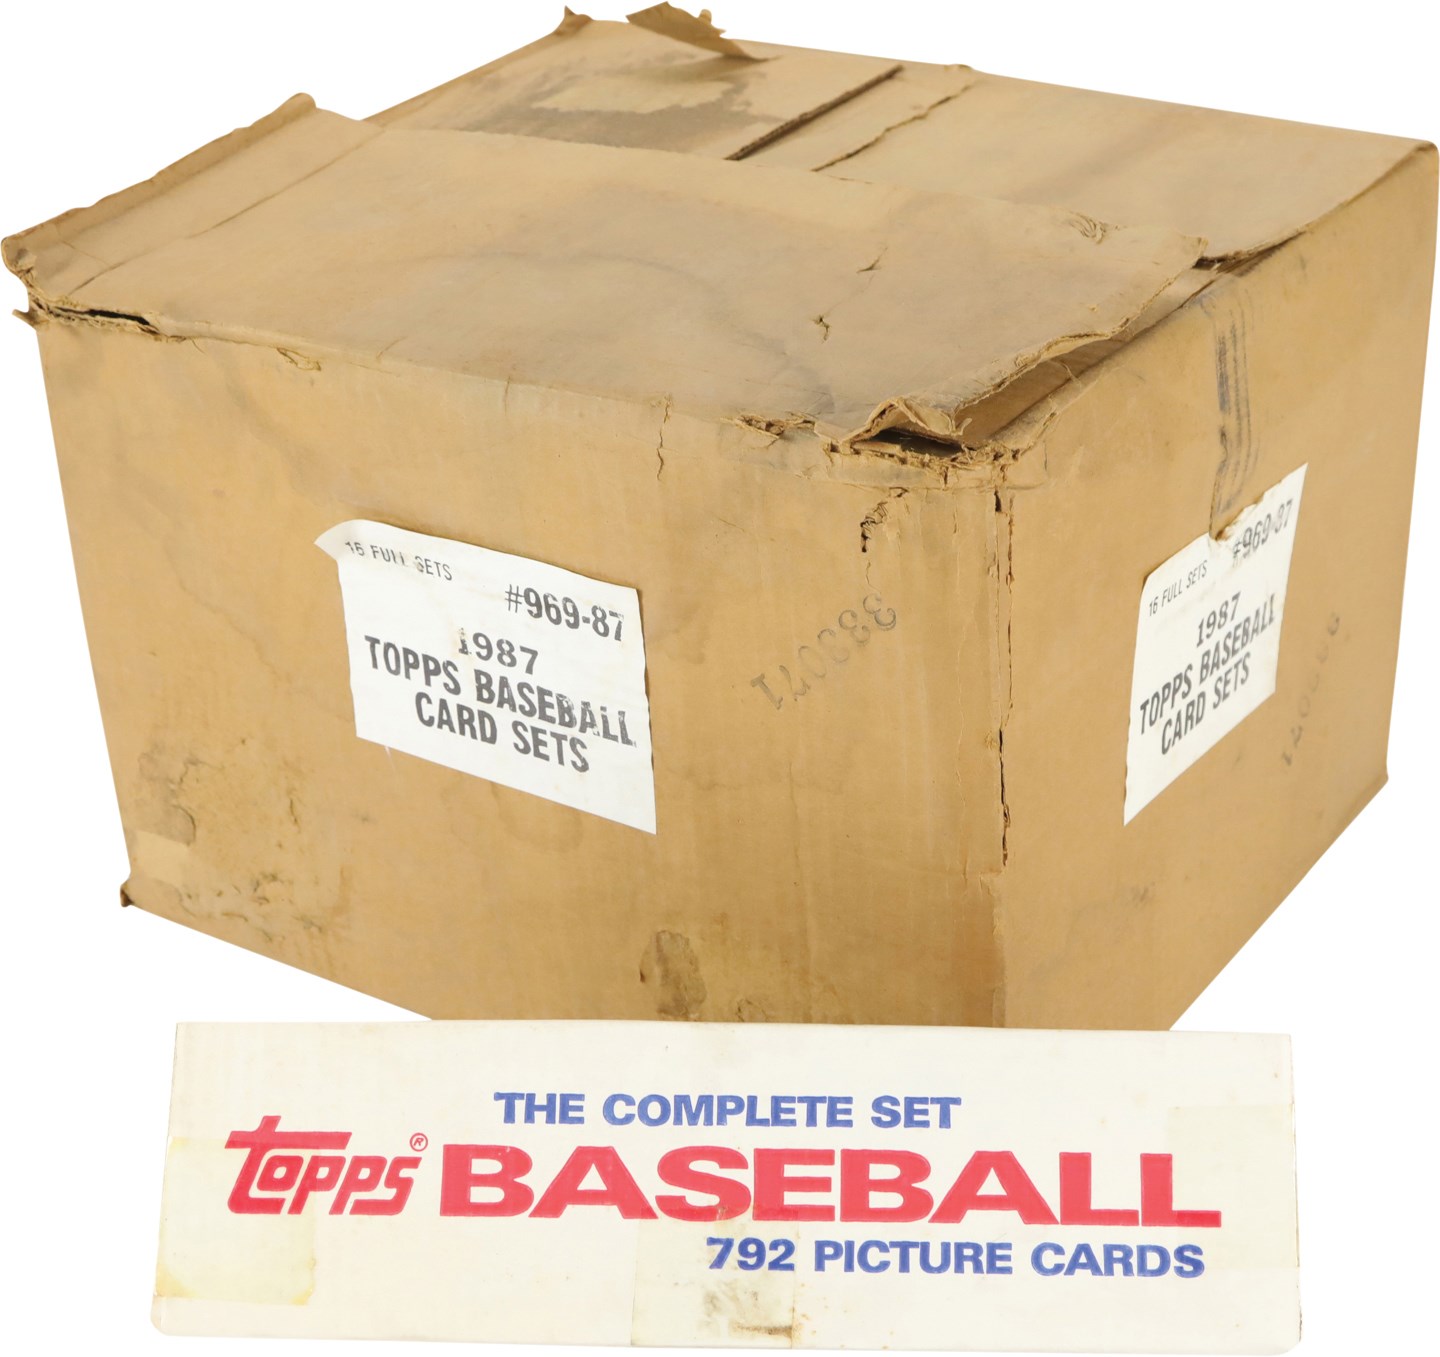 Unopened Boxes, Packs And Cases - 1987 Topps Baseball Factory Complete Set Opened Case (15)